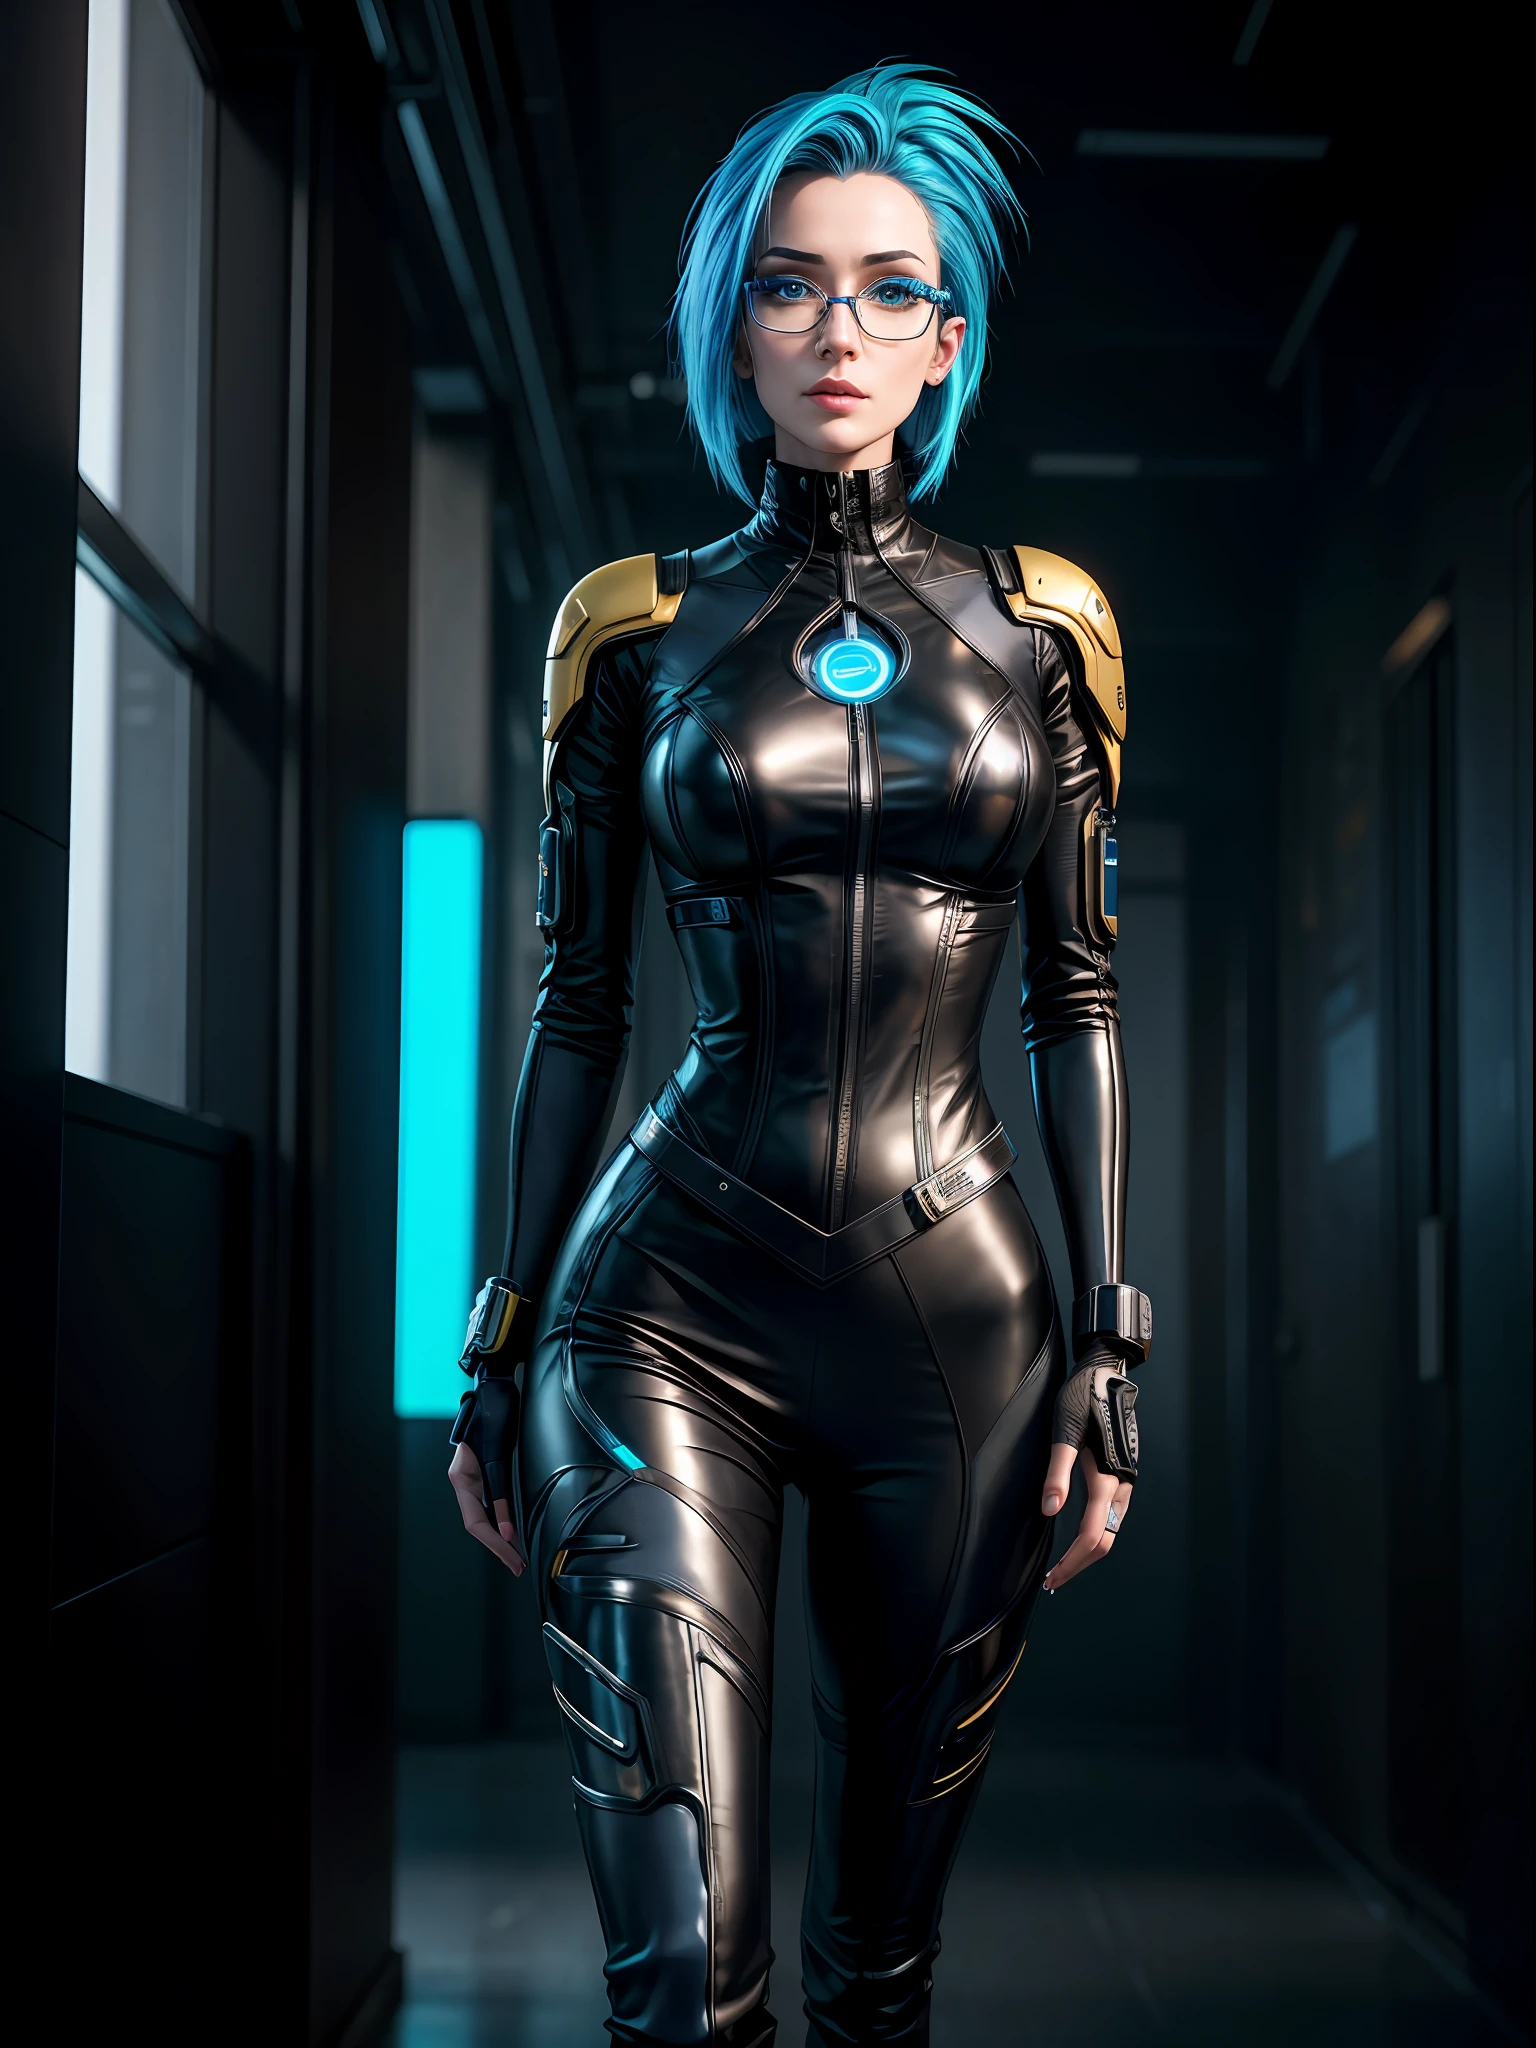 3/4 body, Name: Lyra. A cyberpunk styled female character in her late twenties. She stands at a medium height with a slender build. Her hair is a vibrant shade of neon blue, cut in a sleek bob that frames her face. She has piercing ice-blue eyes and a sharp, angular face. She is dressed in a futuristic secretary outfit, consisting of a high-collared, metallic silver blouse and a black pencil skirt. She wears a pair of high-tech glasses that display various data. The corporate logo is subtly displayed on her outfit, hyper realistic, photorealistic, Unreal Engine 5